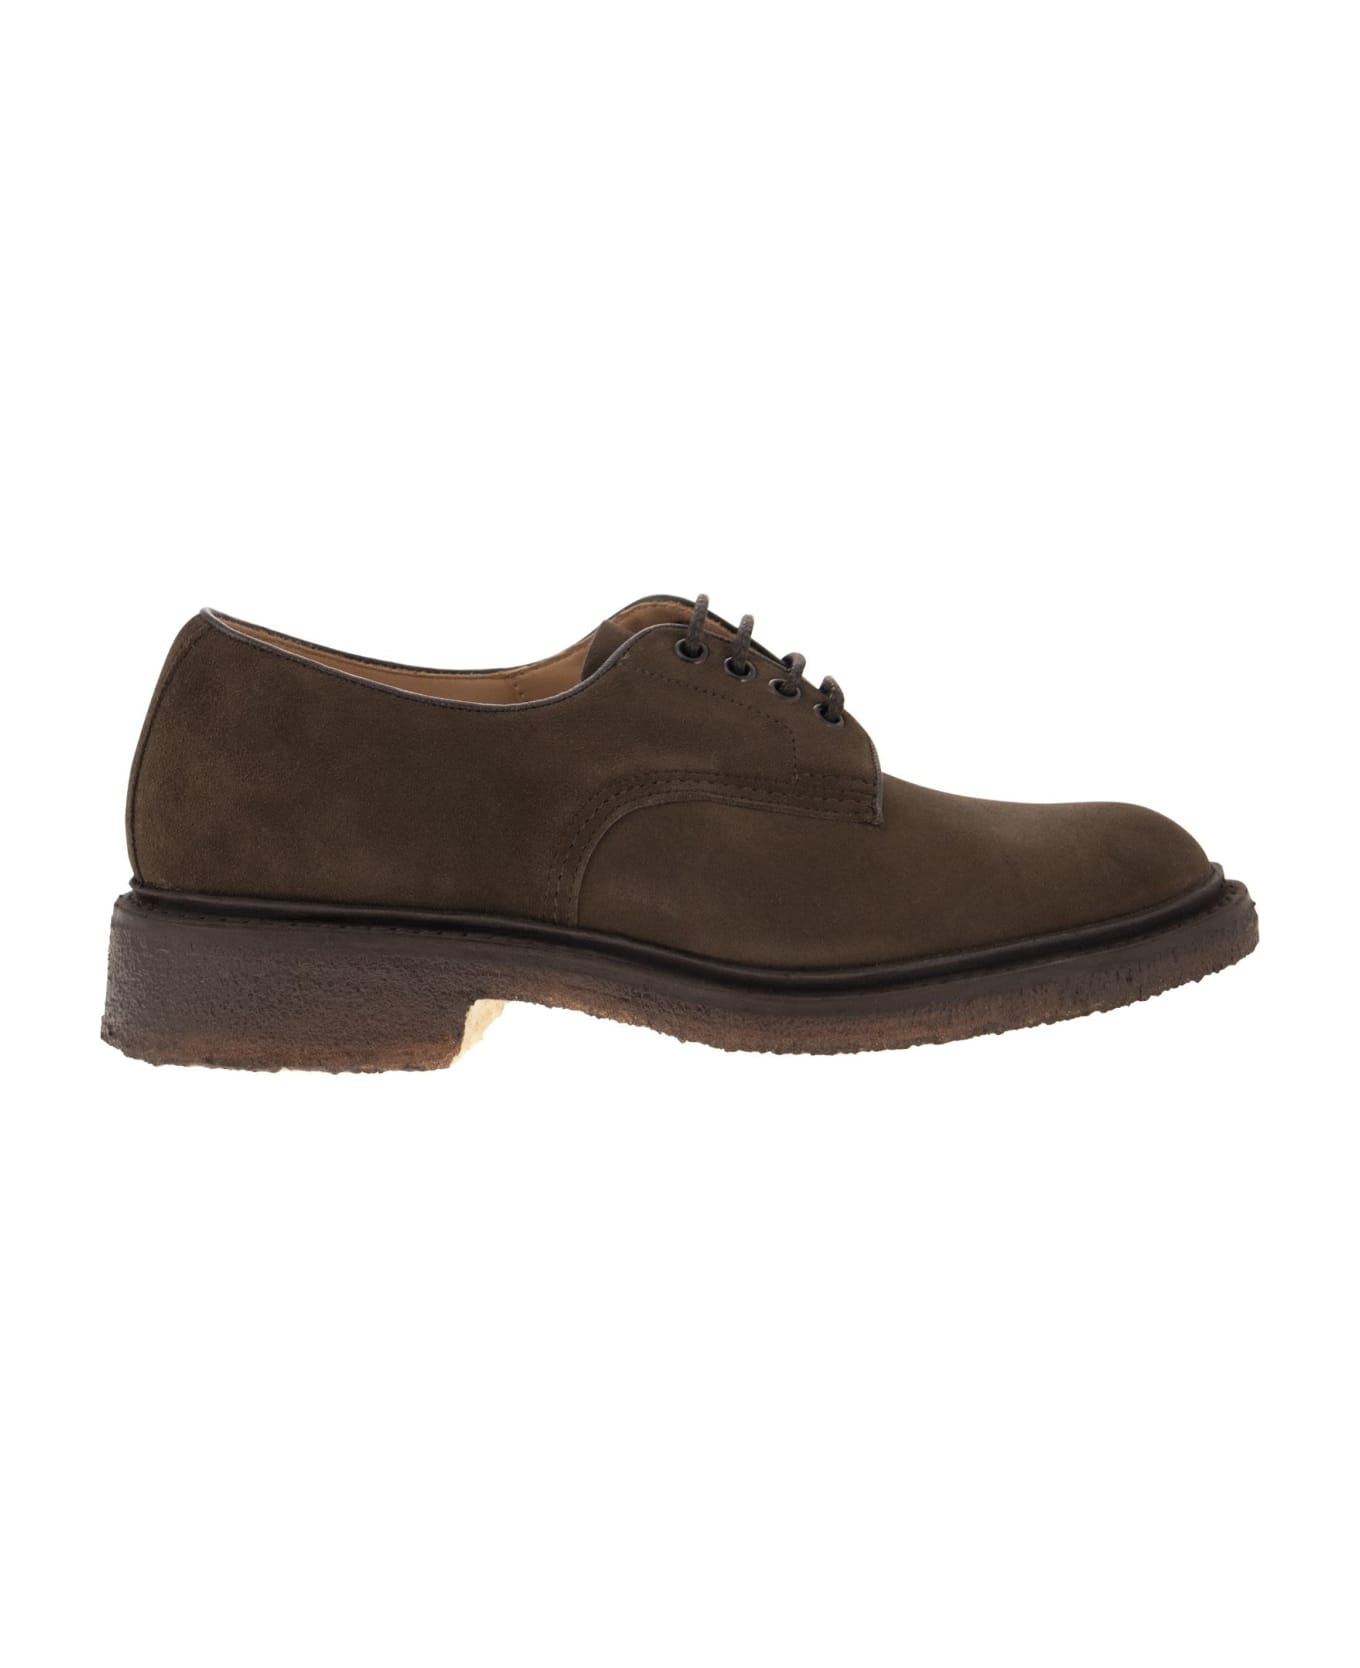 Tricker's Daniel - Suede Leather Lace-up - Brown